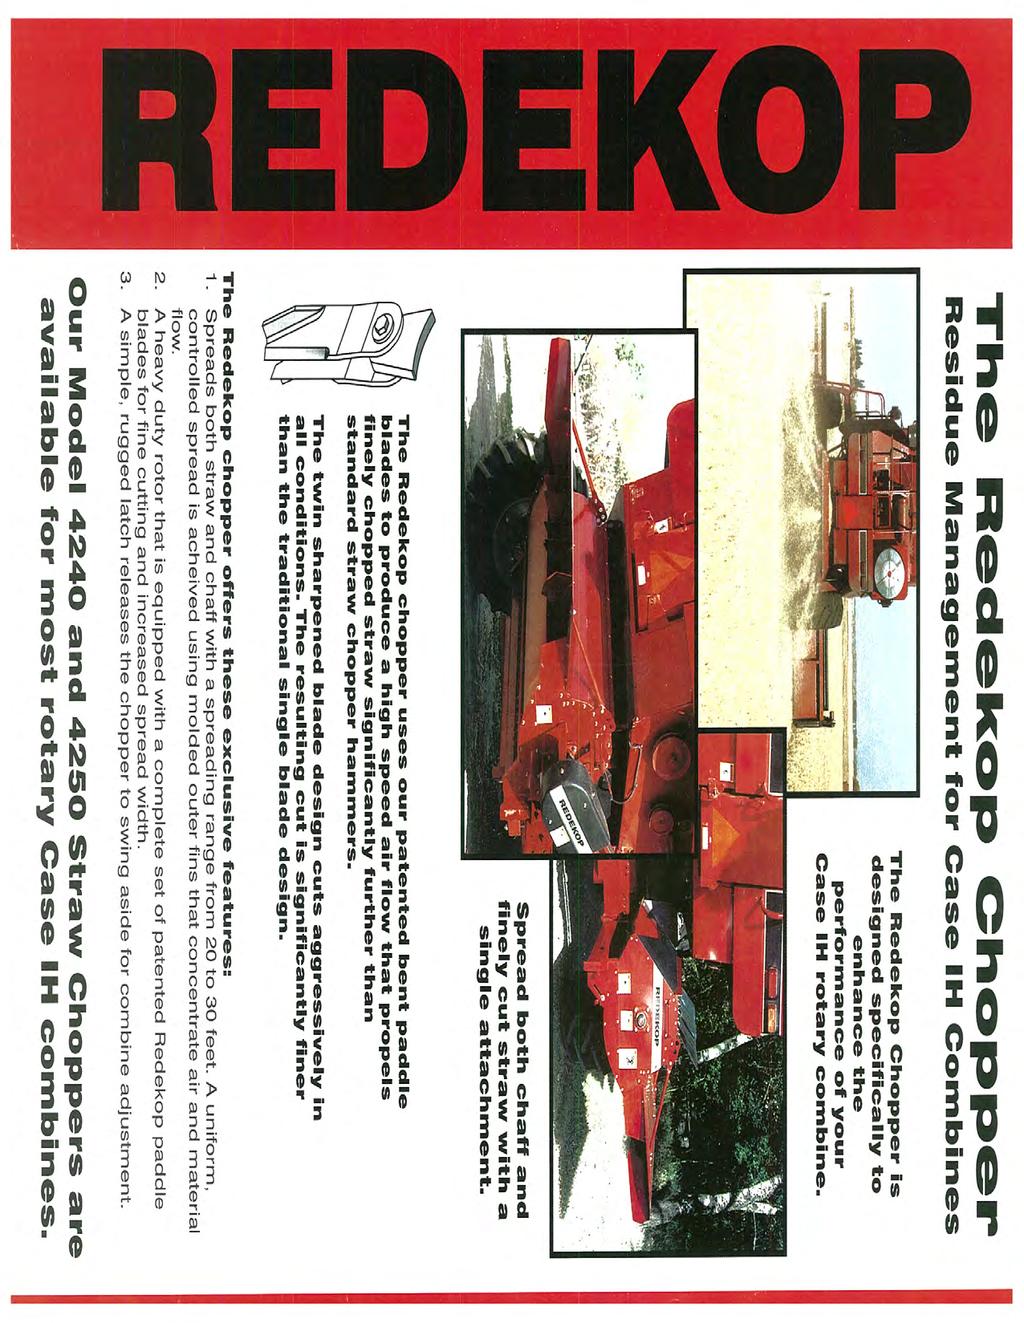 The Redekop Chopper Residue Management for Case IH Combines The Redekop Chopper is I designed specifically to 1 enhance the Case IH rotary combine. I I / :.: P KOP cc~.